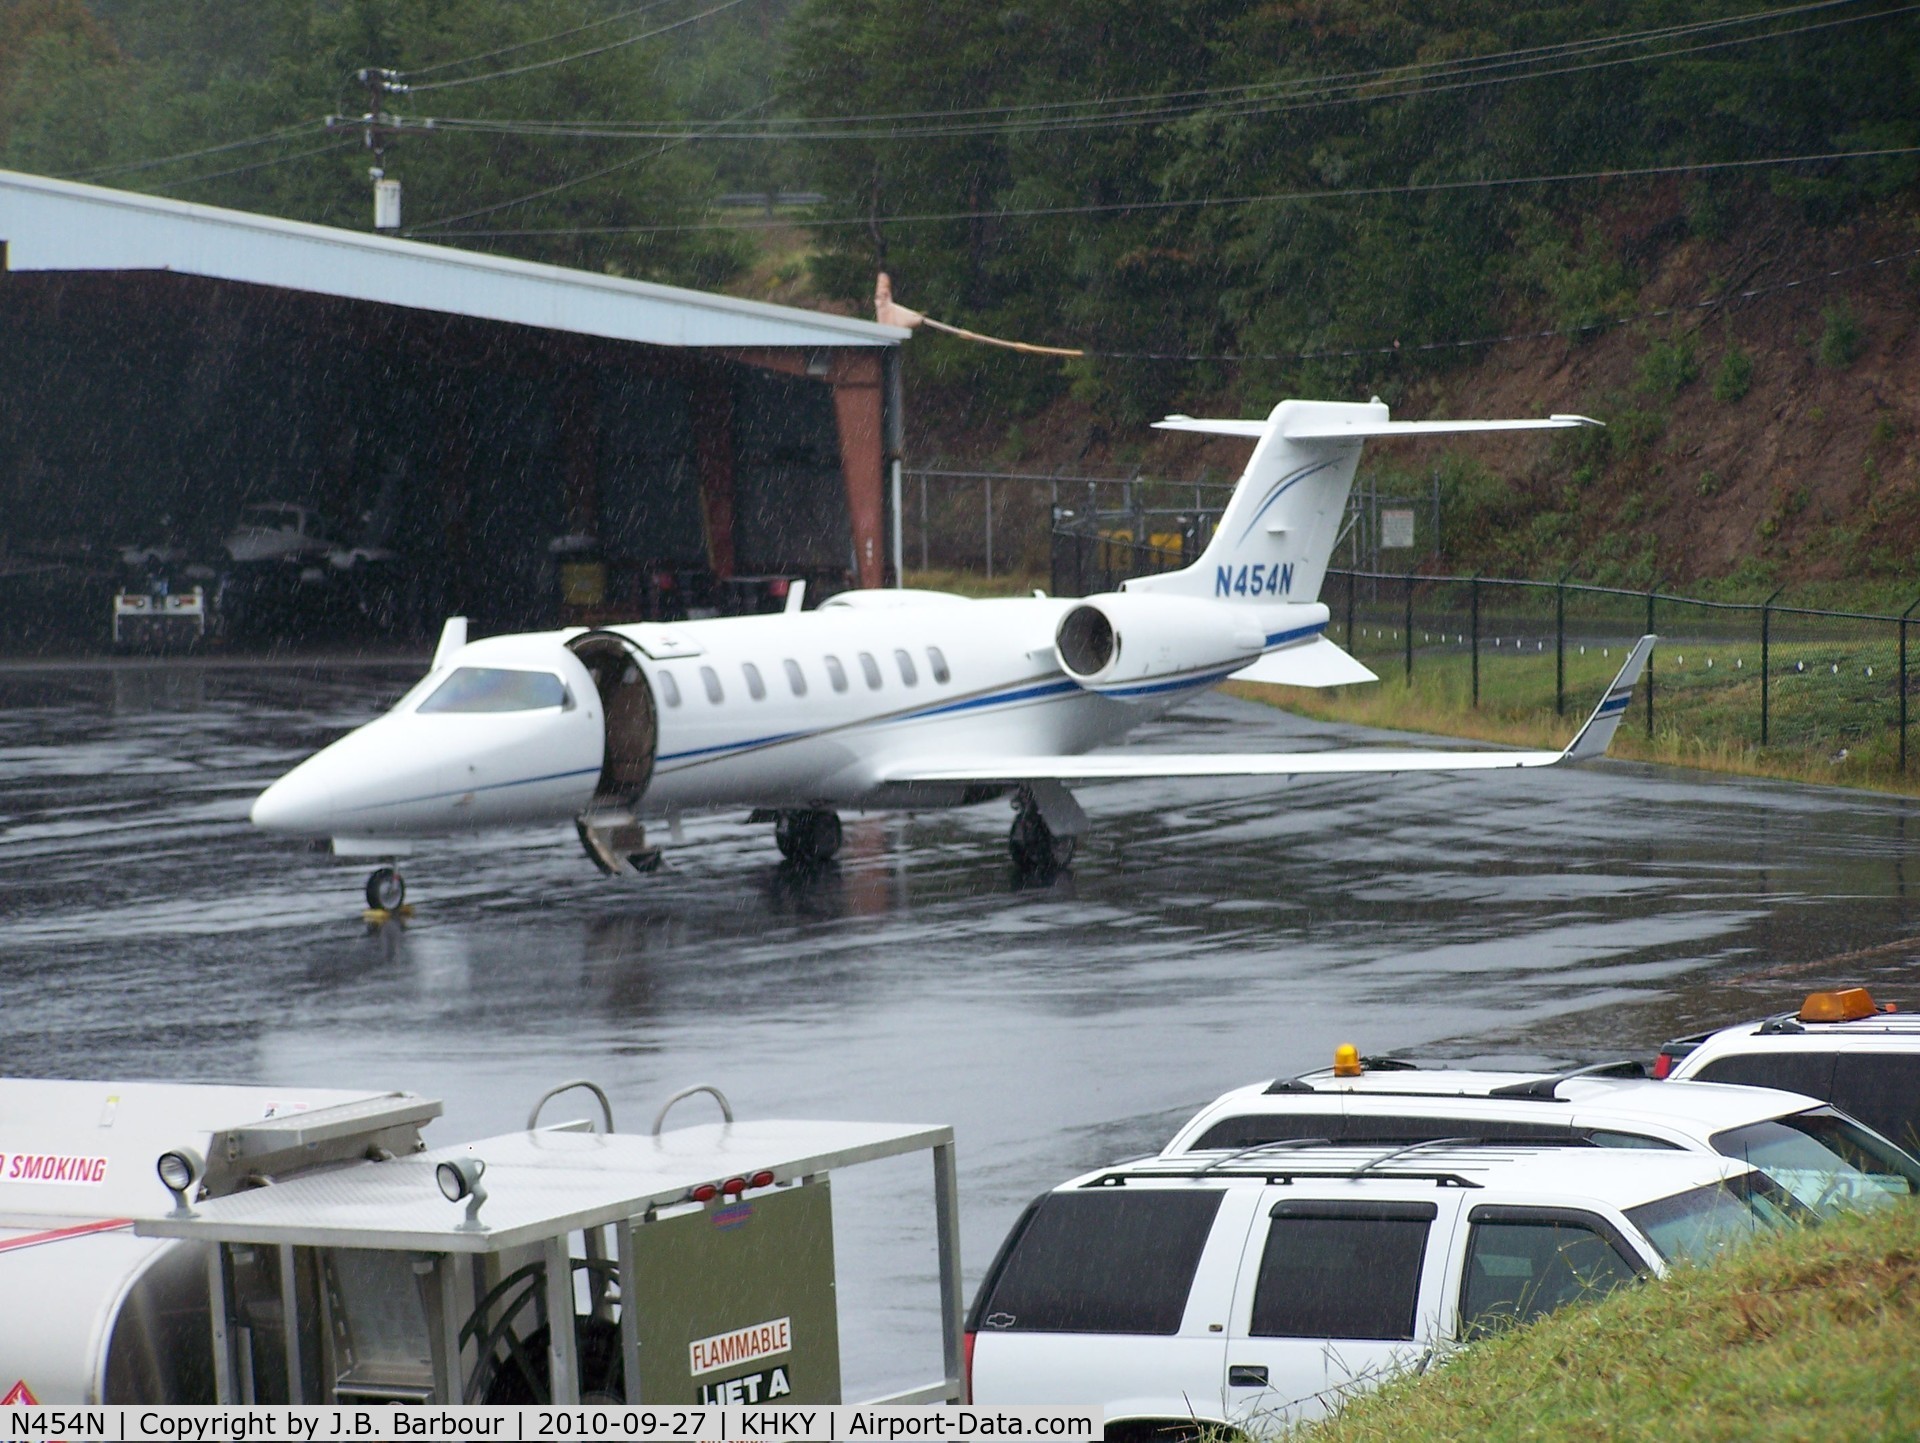 N454N, 2007 Learjet 45 C/N 339, A very wet day to be out.